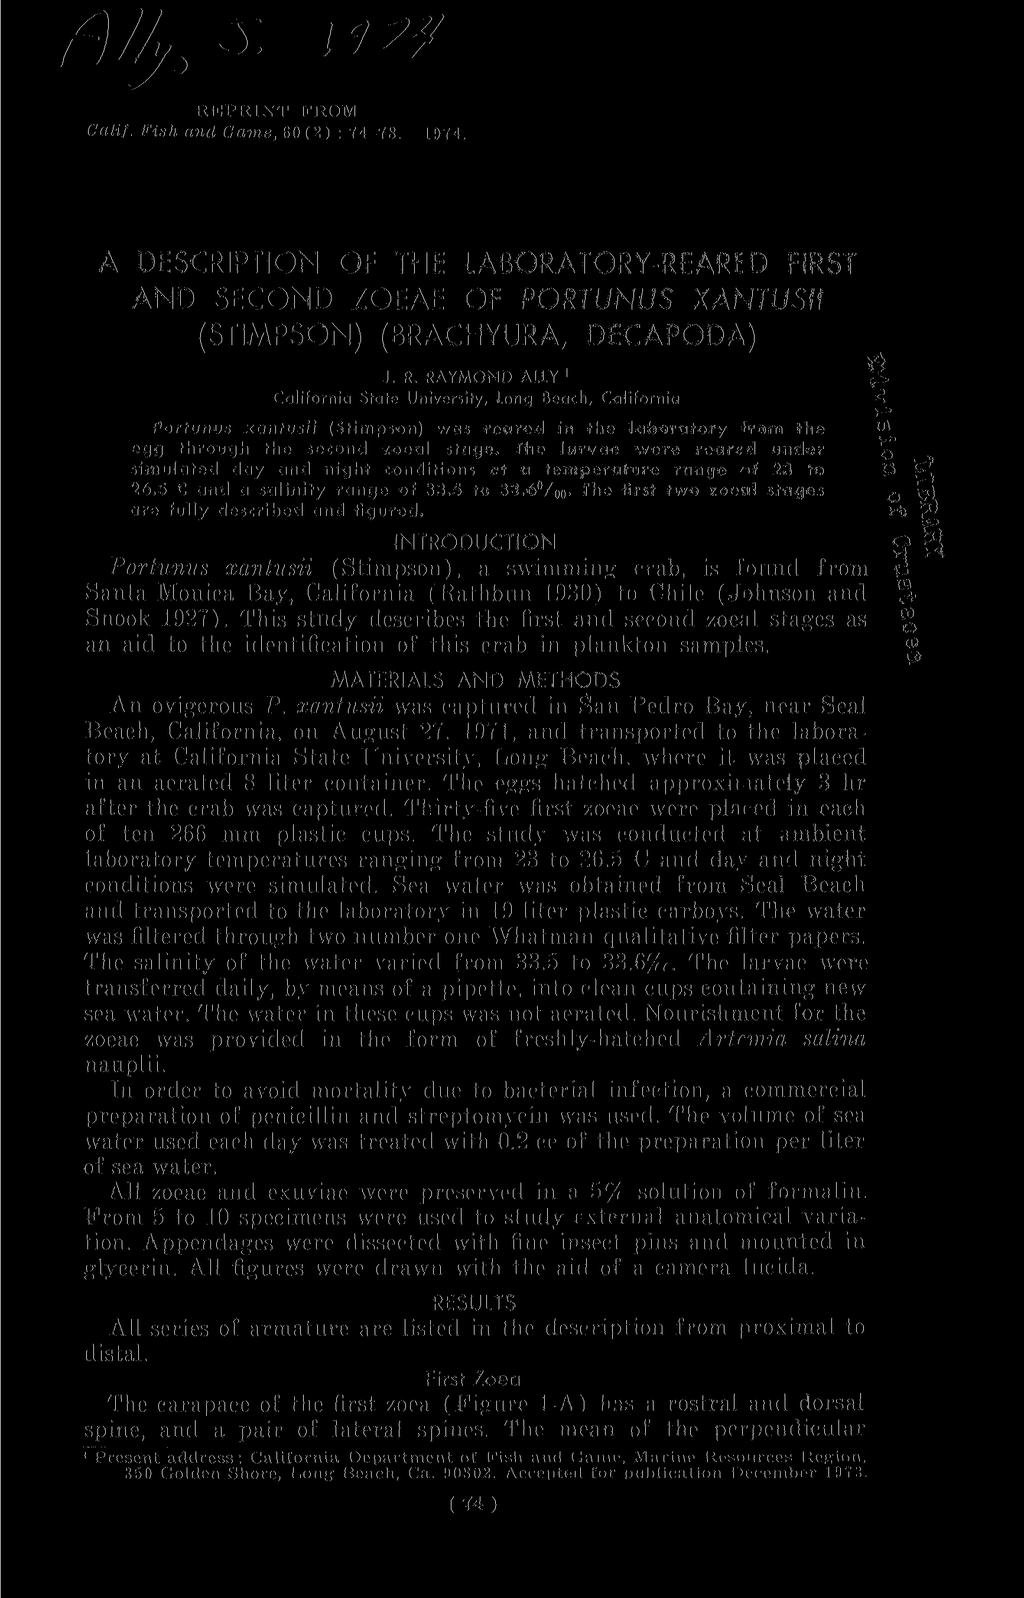 REPRINT FROM Calif. Fish and Game, 60(2) : 74-78. 1974. A DESCRIPTION OF THE LABORATORY-REARED FIRST AND SECOND ZOEAE OF PORTUNUS X At IT US it (STIMPSON) (BRACHYURA, DECAPODA) J. R.